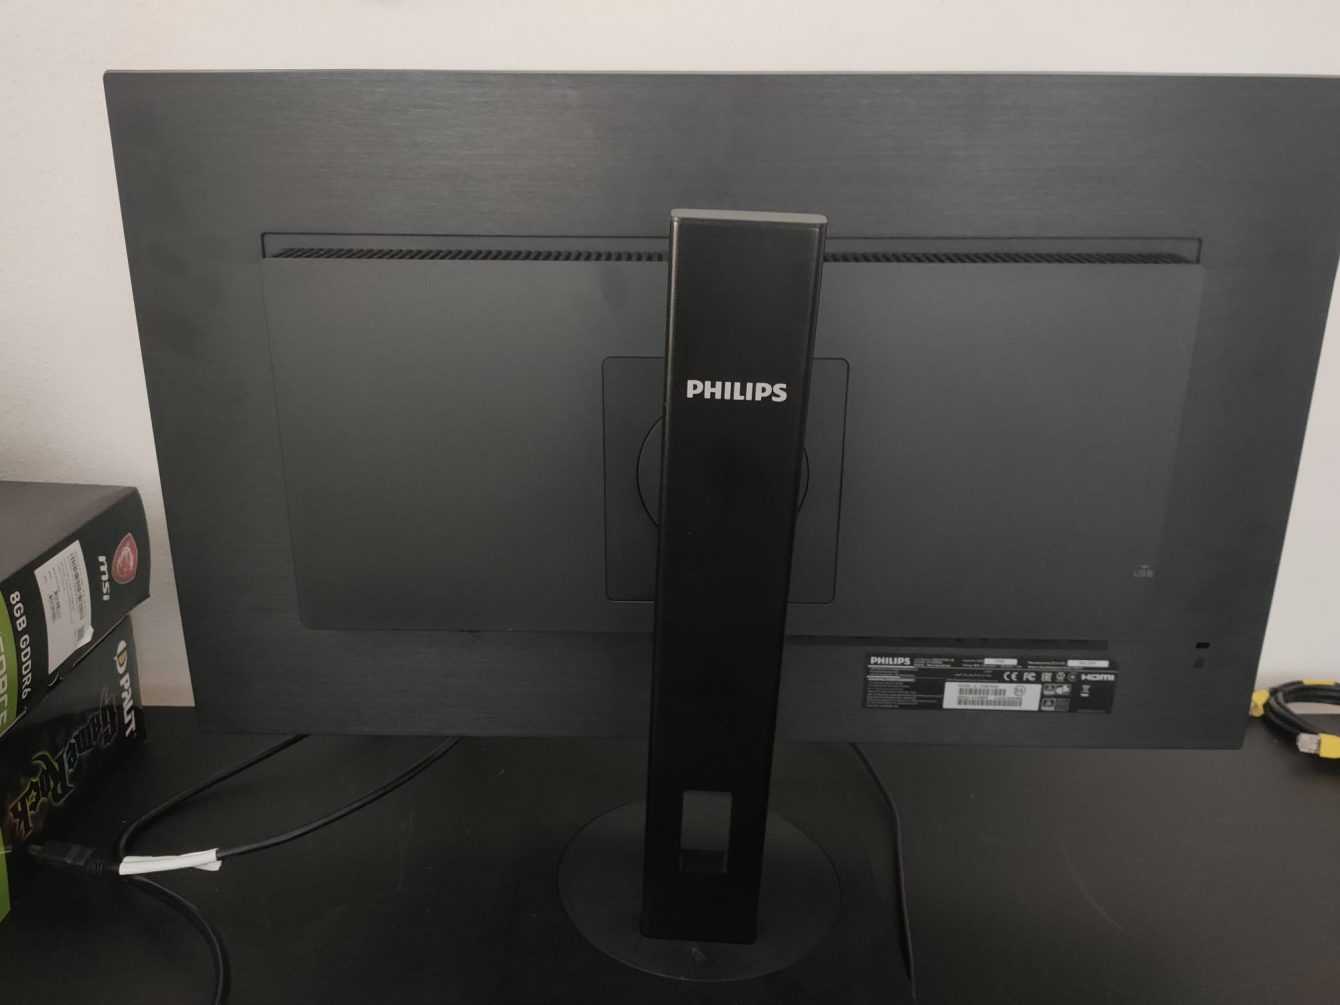 Philips 272B1G review: the super green monitor